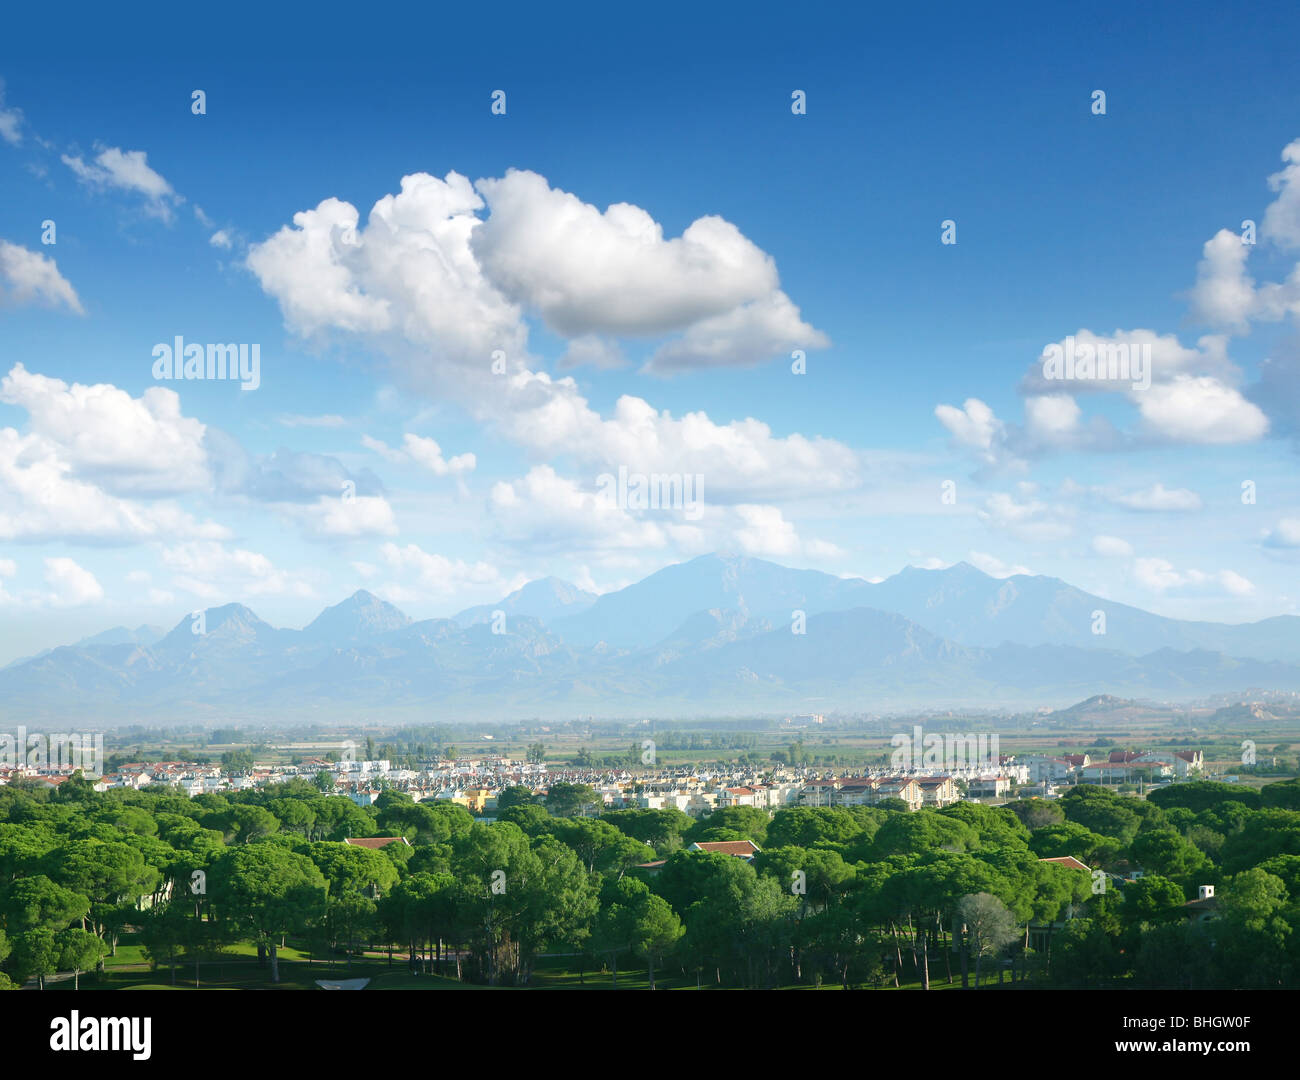 A small town on the background of mountains Stock Photo